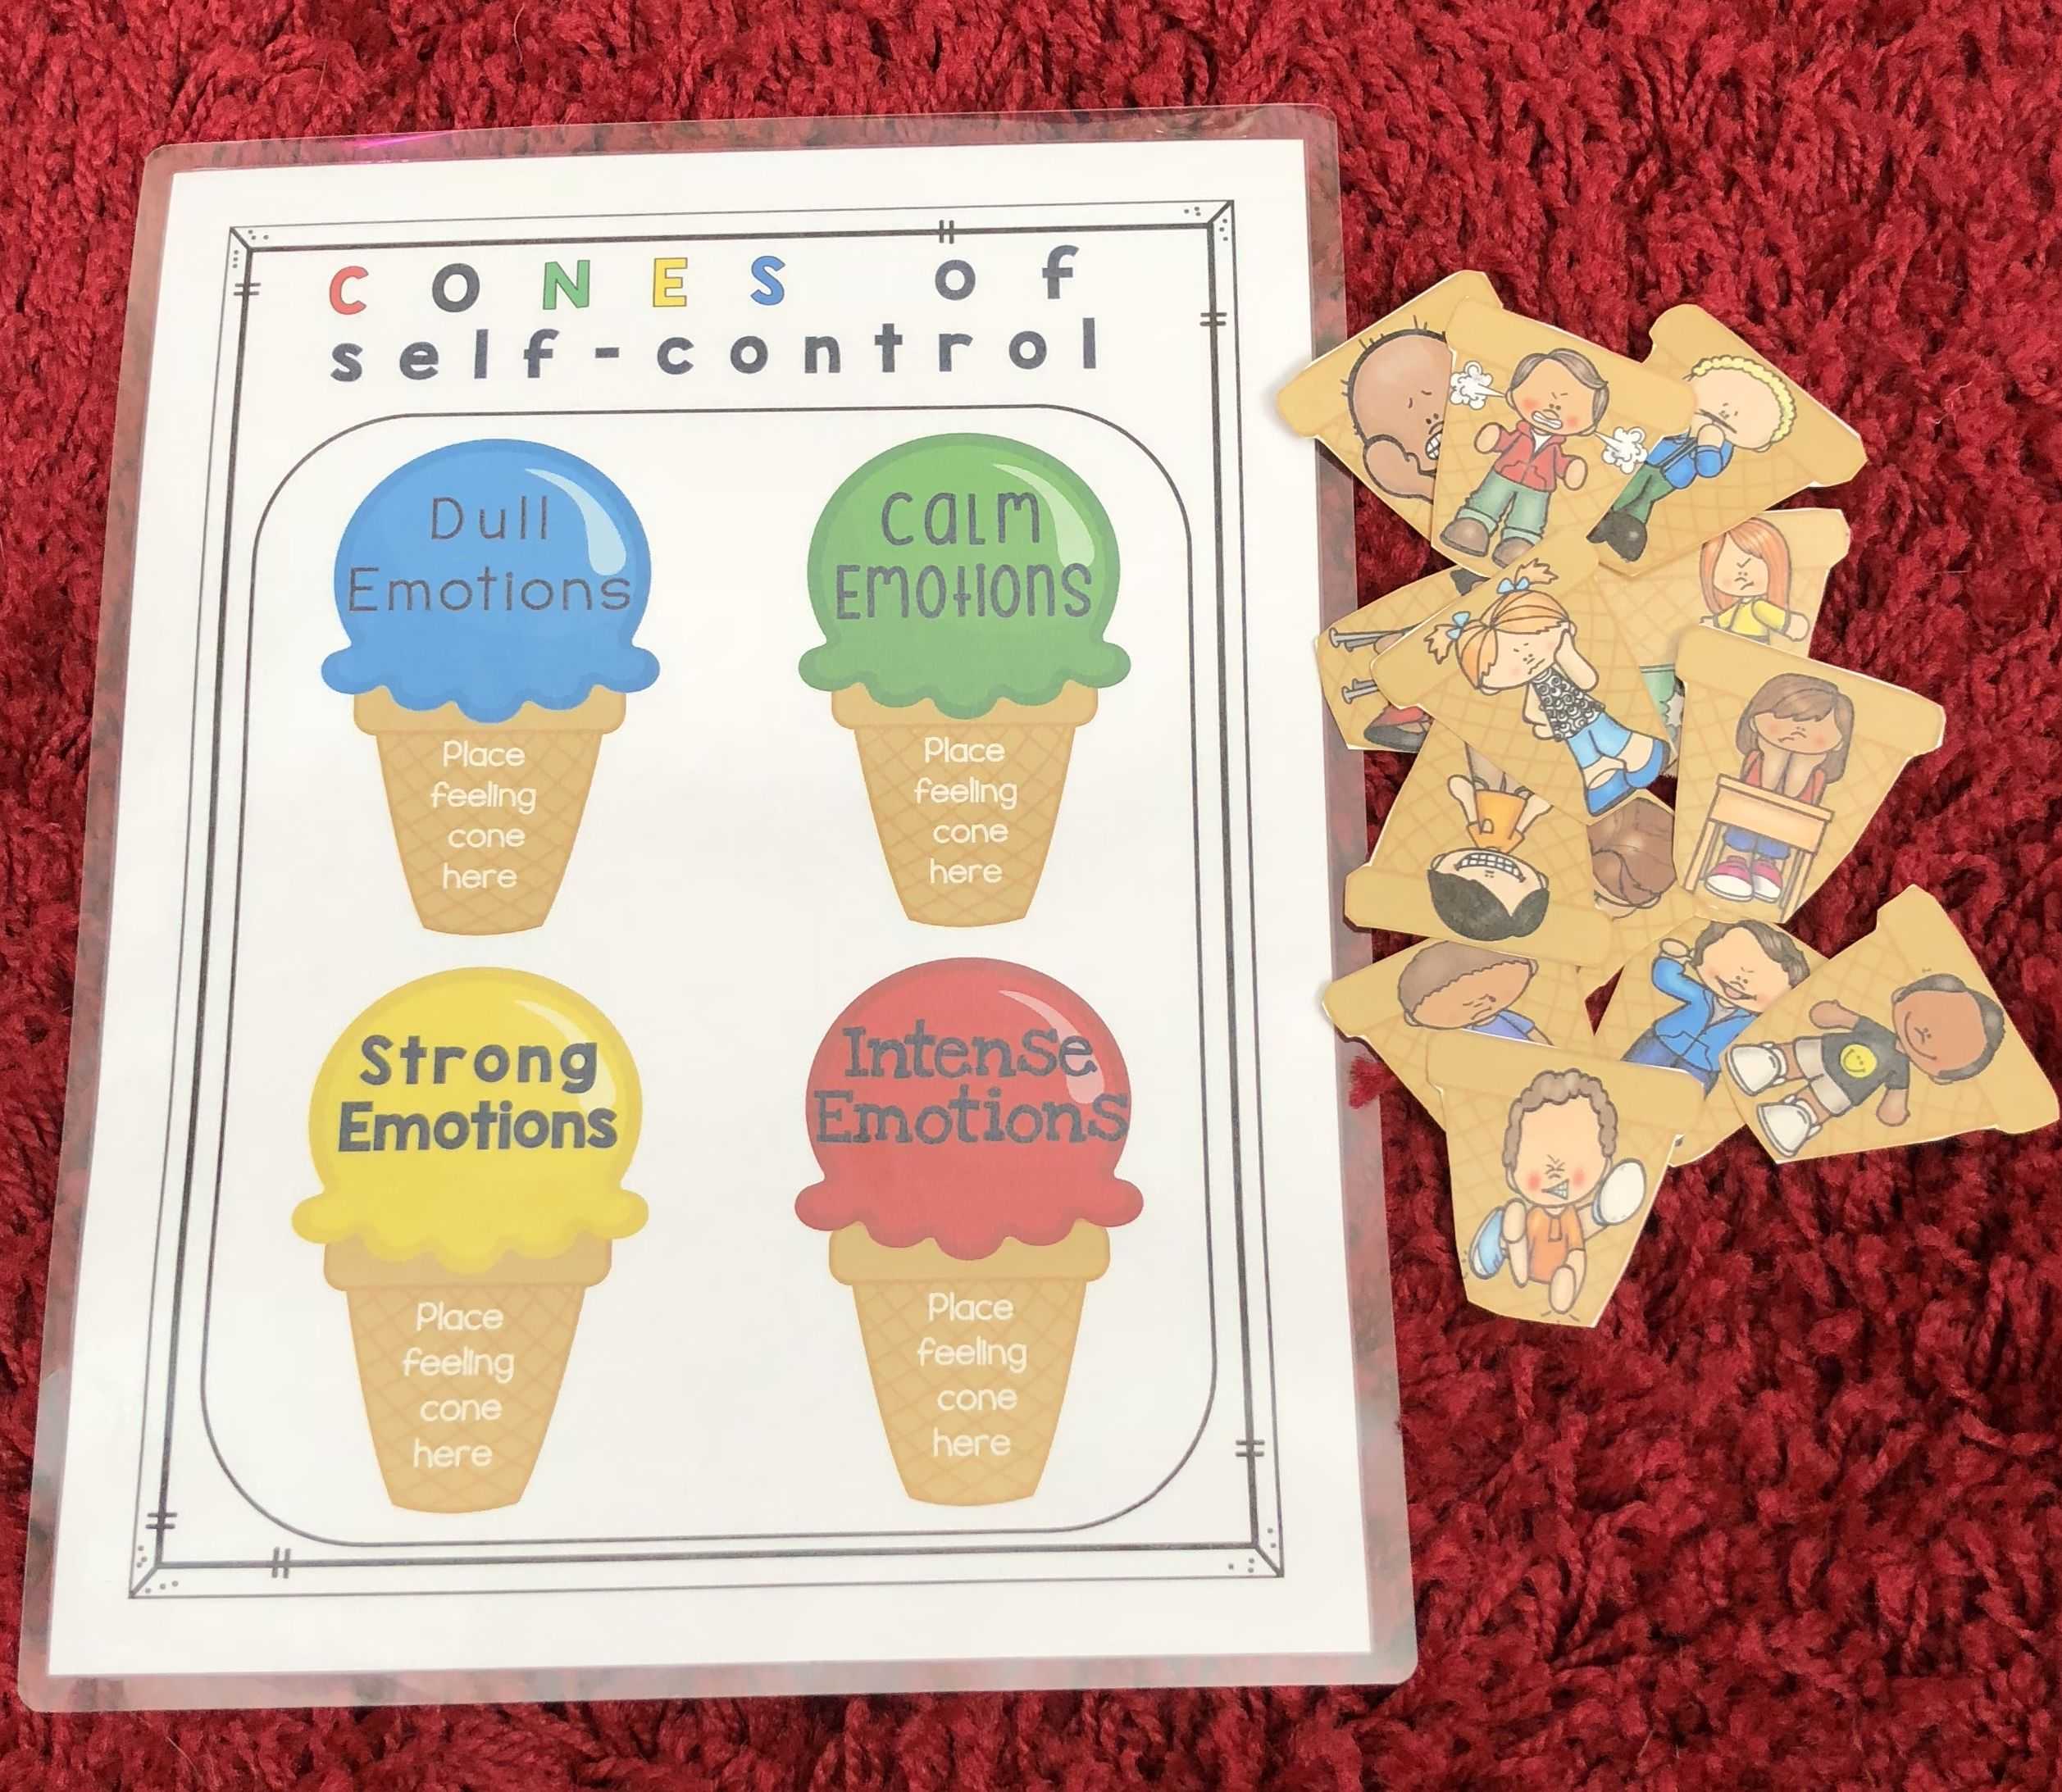 Emotional Regulation Worksheets Along with Anger Self Control Activities Cones Of Regulation